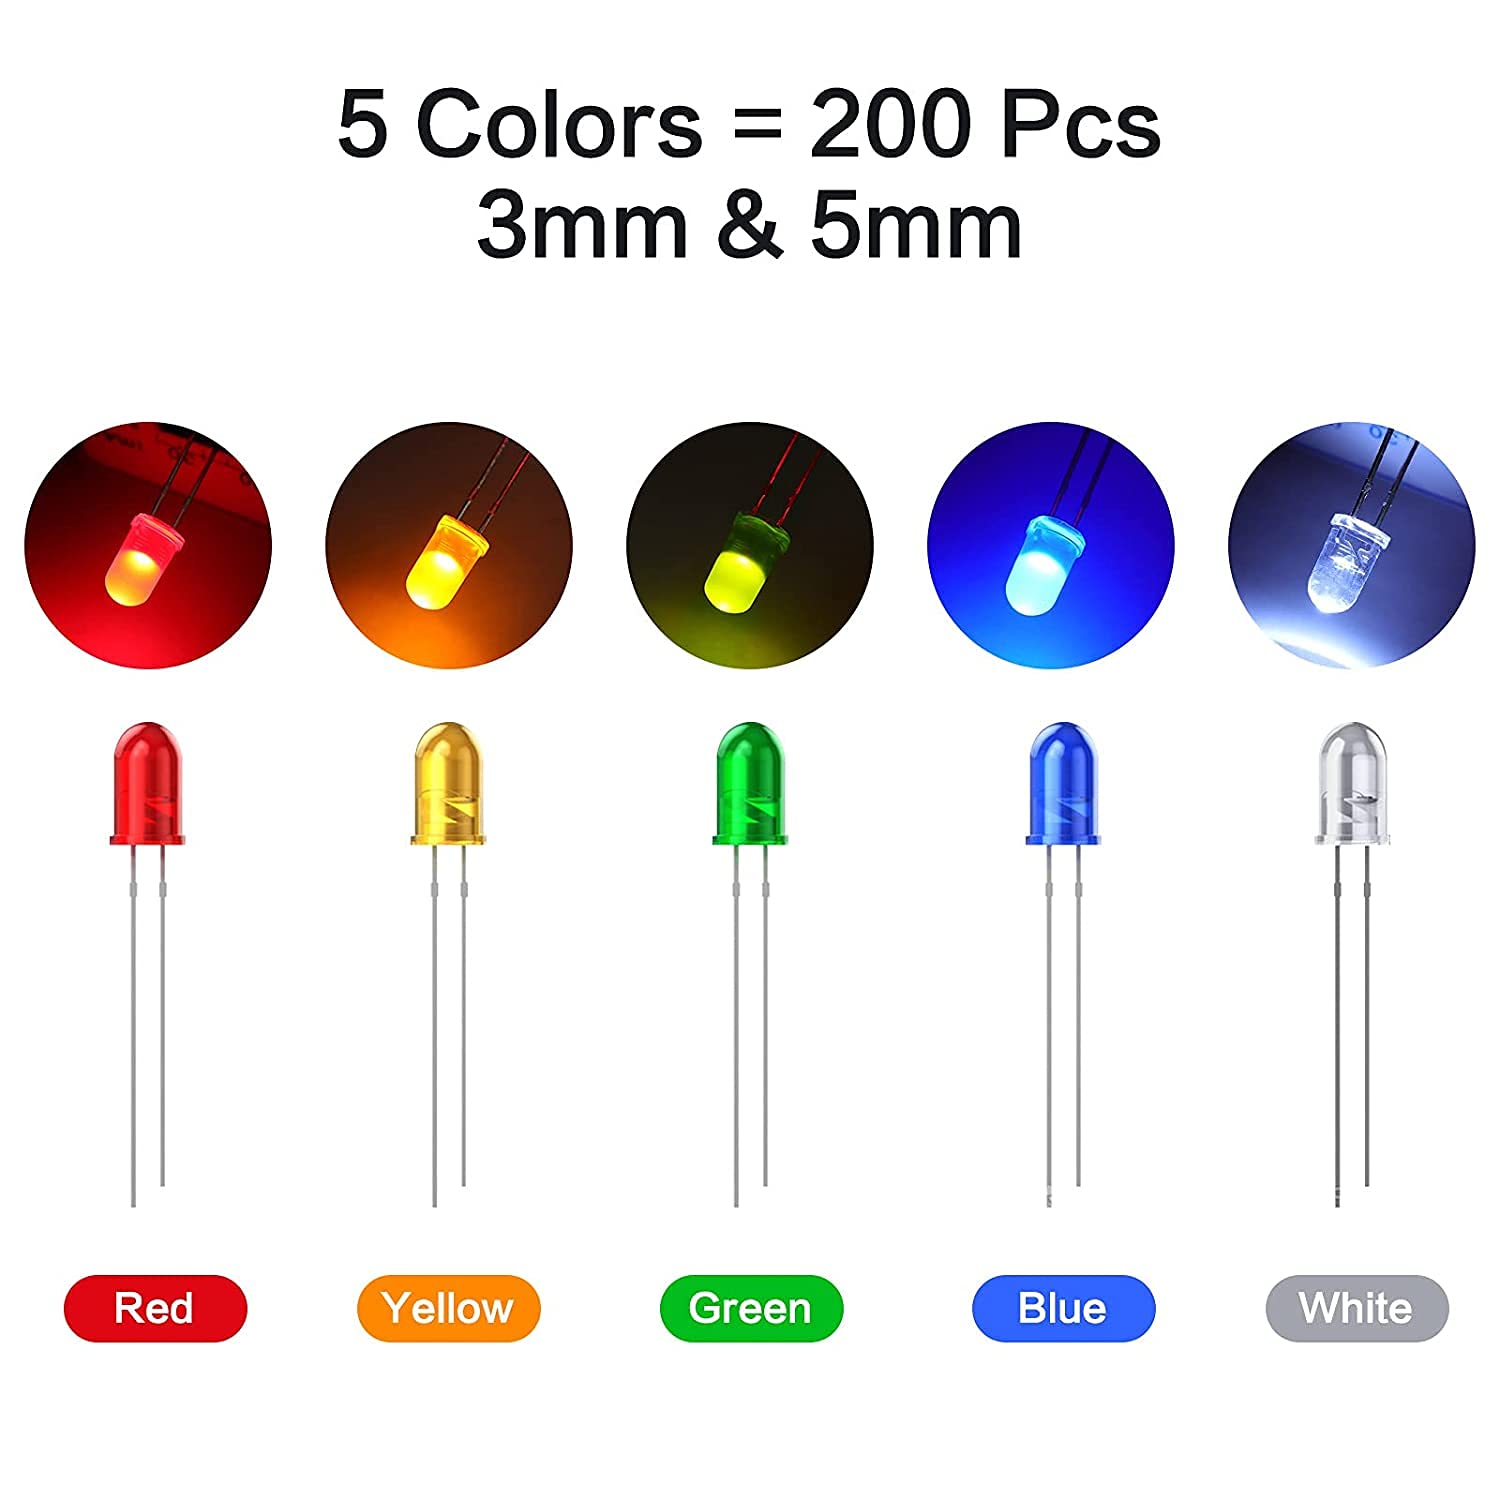 200Pcs 3mm  5mm Led Light Emitting Diodes Assortment Kit, Mini/Tiny/Small Individual Led Single Light, Clear/White Red Green Blue Yellow Assorted Led Diode Bulbs Set for Arduino, Breadboard, etc